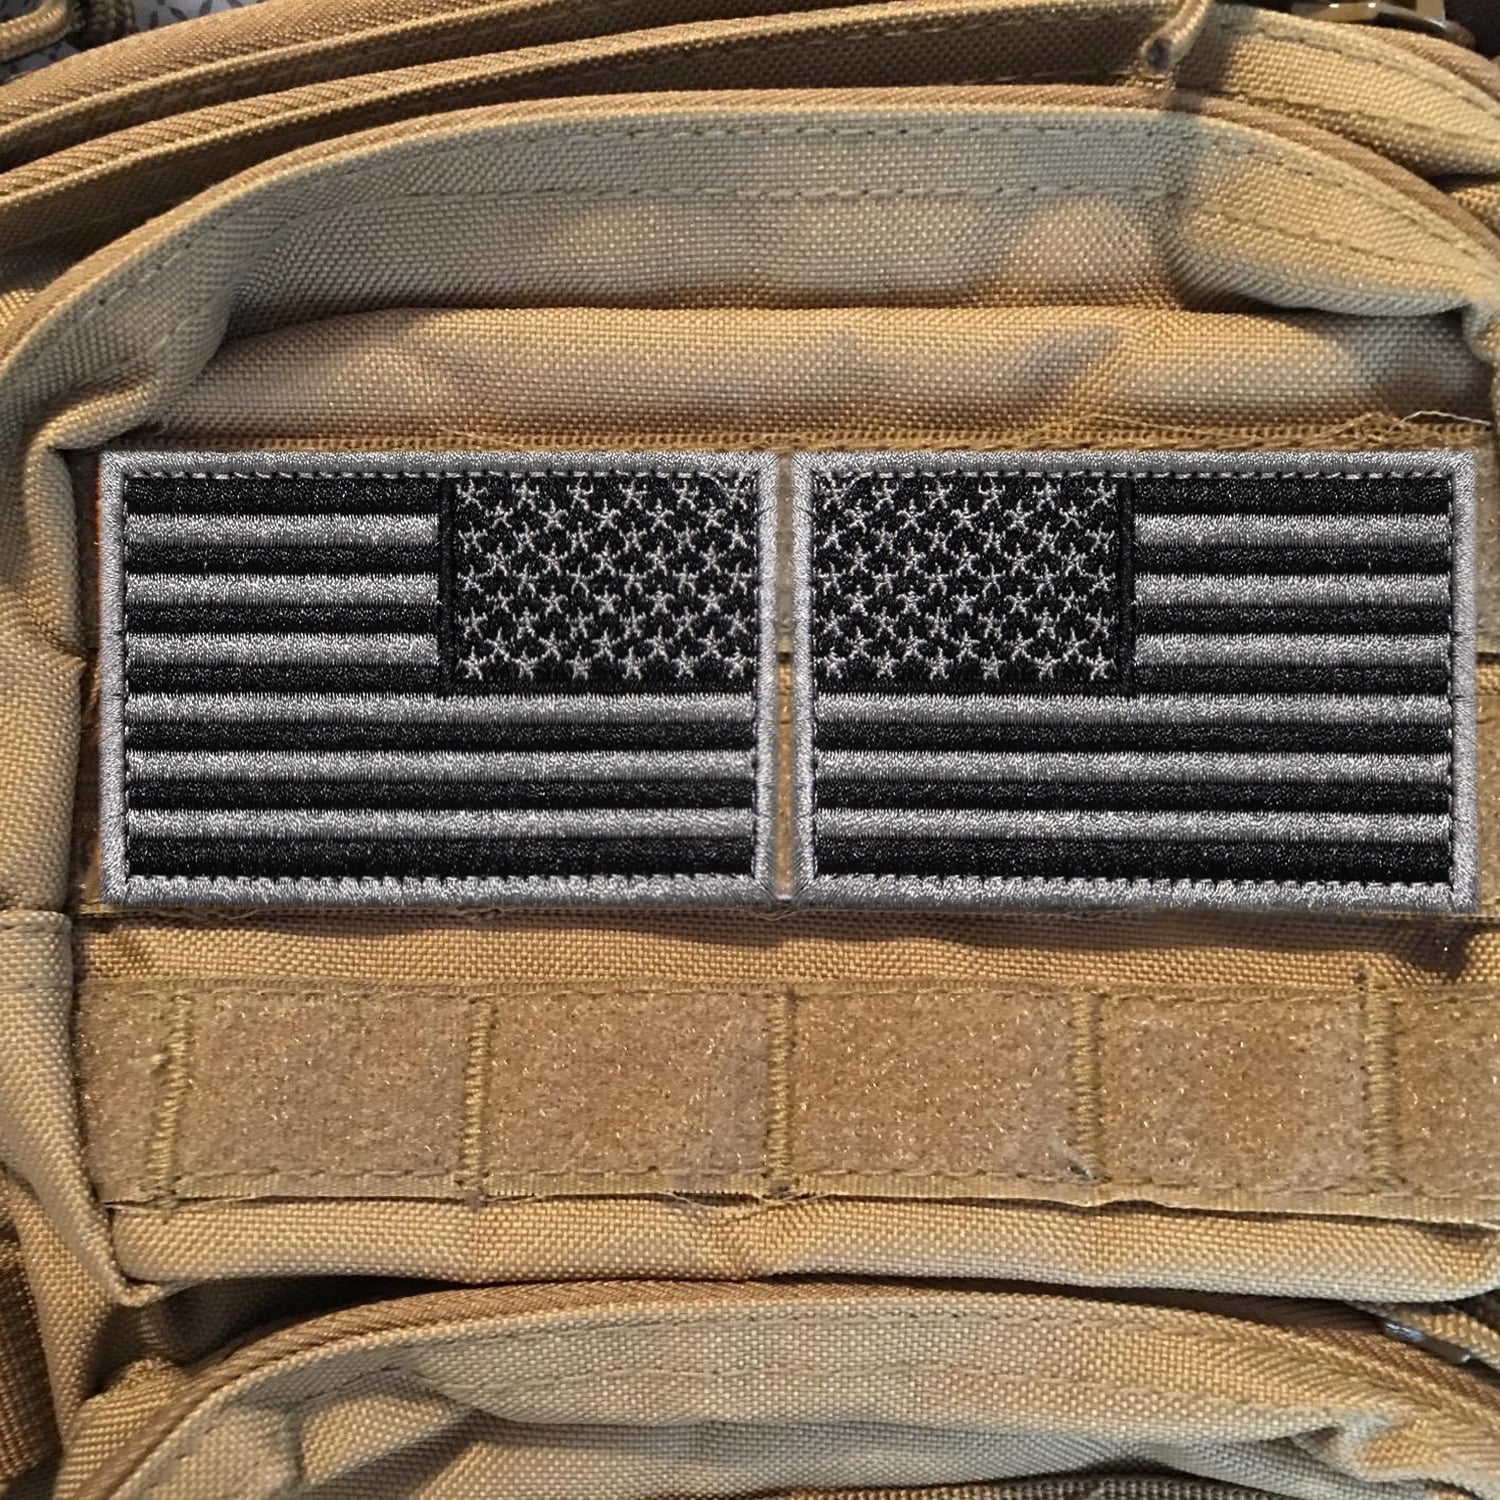 Anley Tactical USA Flag Patches Set Velcro Hook Attaches to Tactical Hats and Gears 2 Pack Forward & Reversed 2x 3 Black & Gray American Flag Military Uniform Emblem Patch 